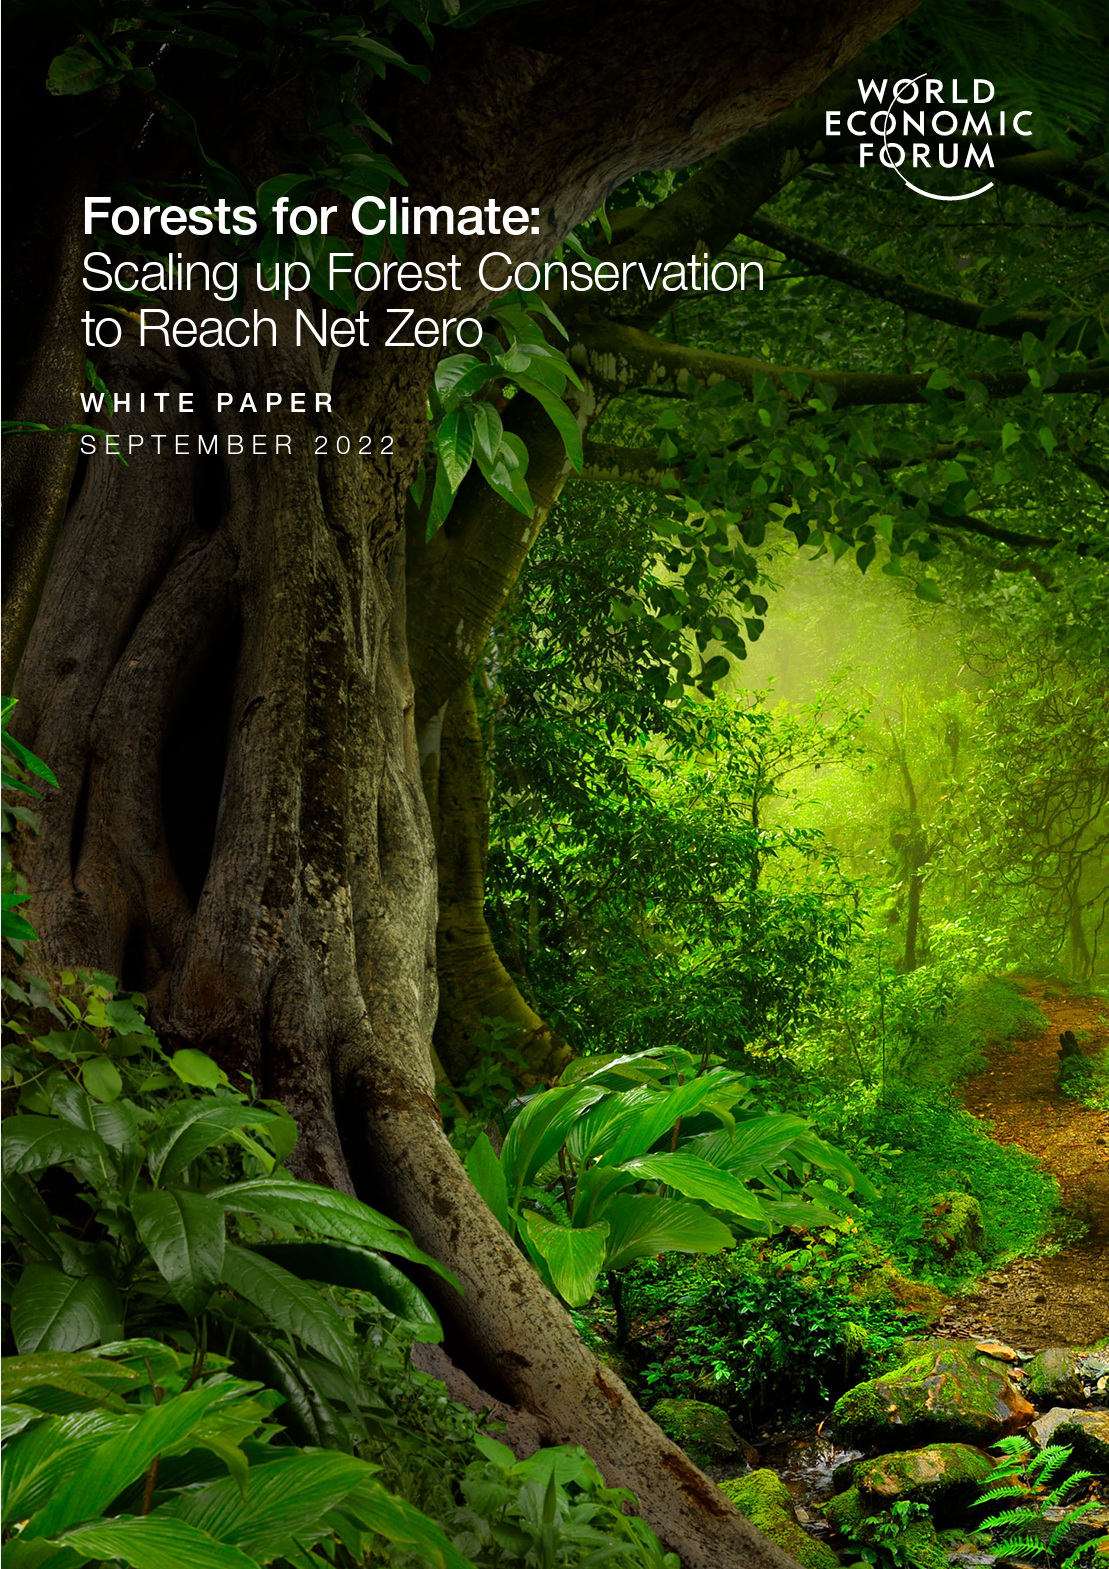 Forests for Climate: Scaling up Forest Conservation to Reach Net Zero